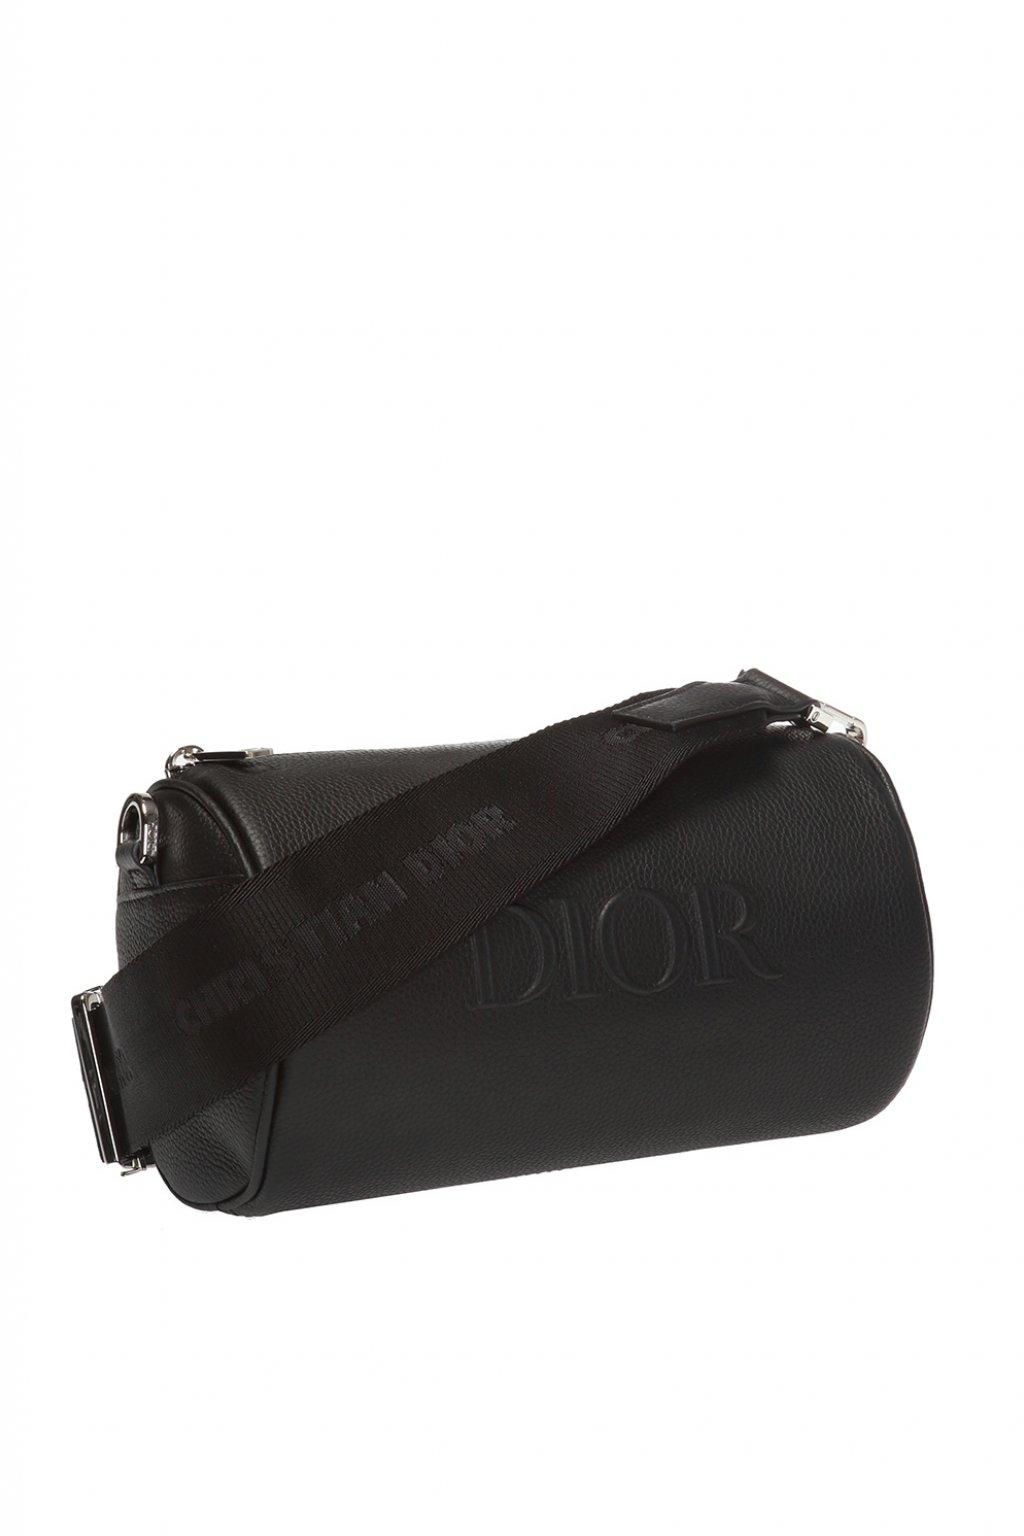 dior roller pouch bag price